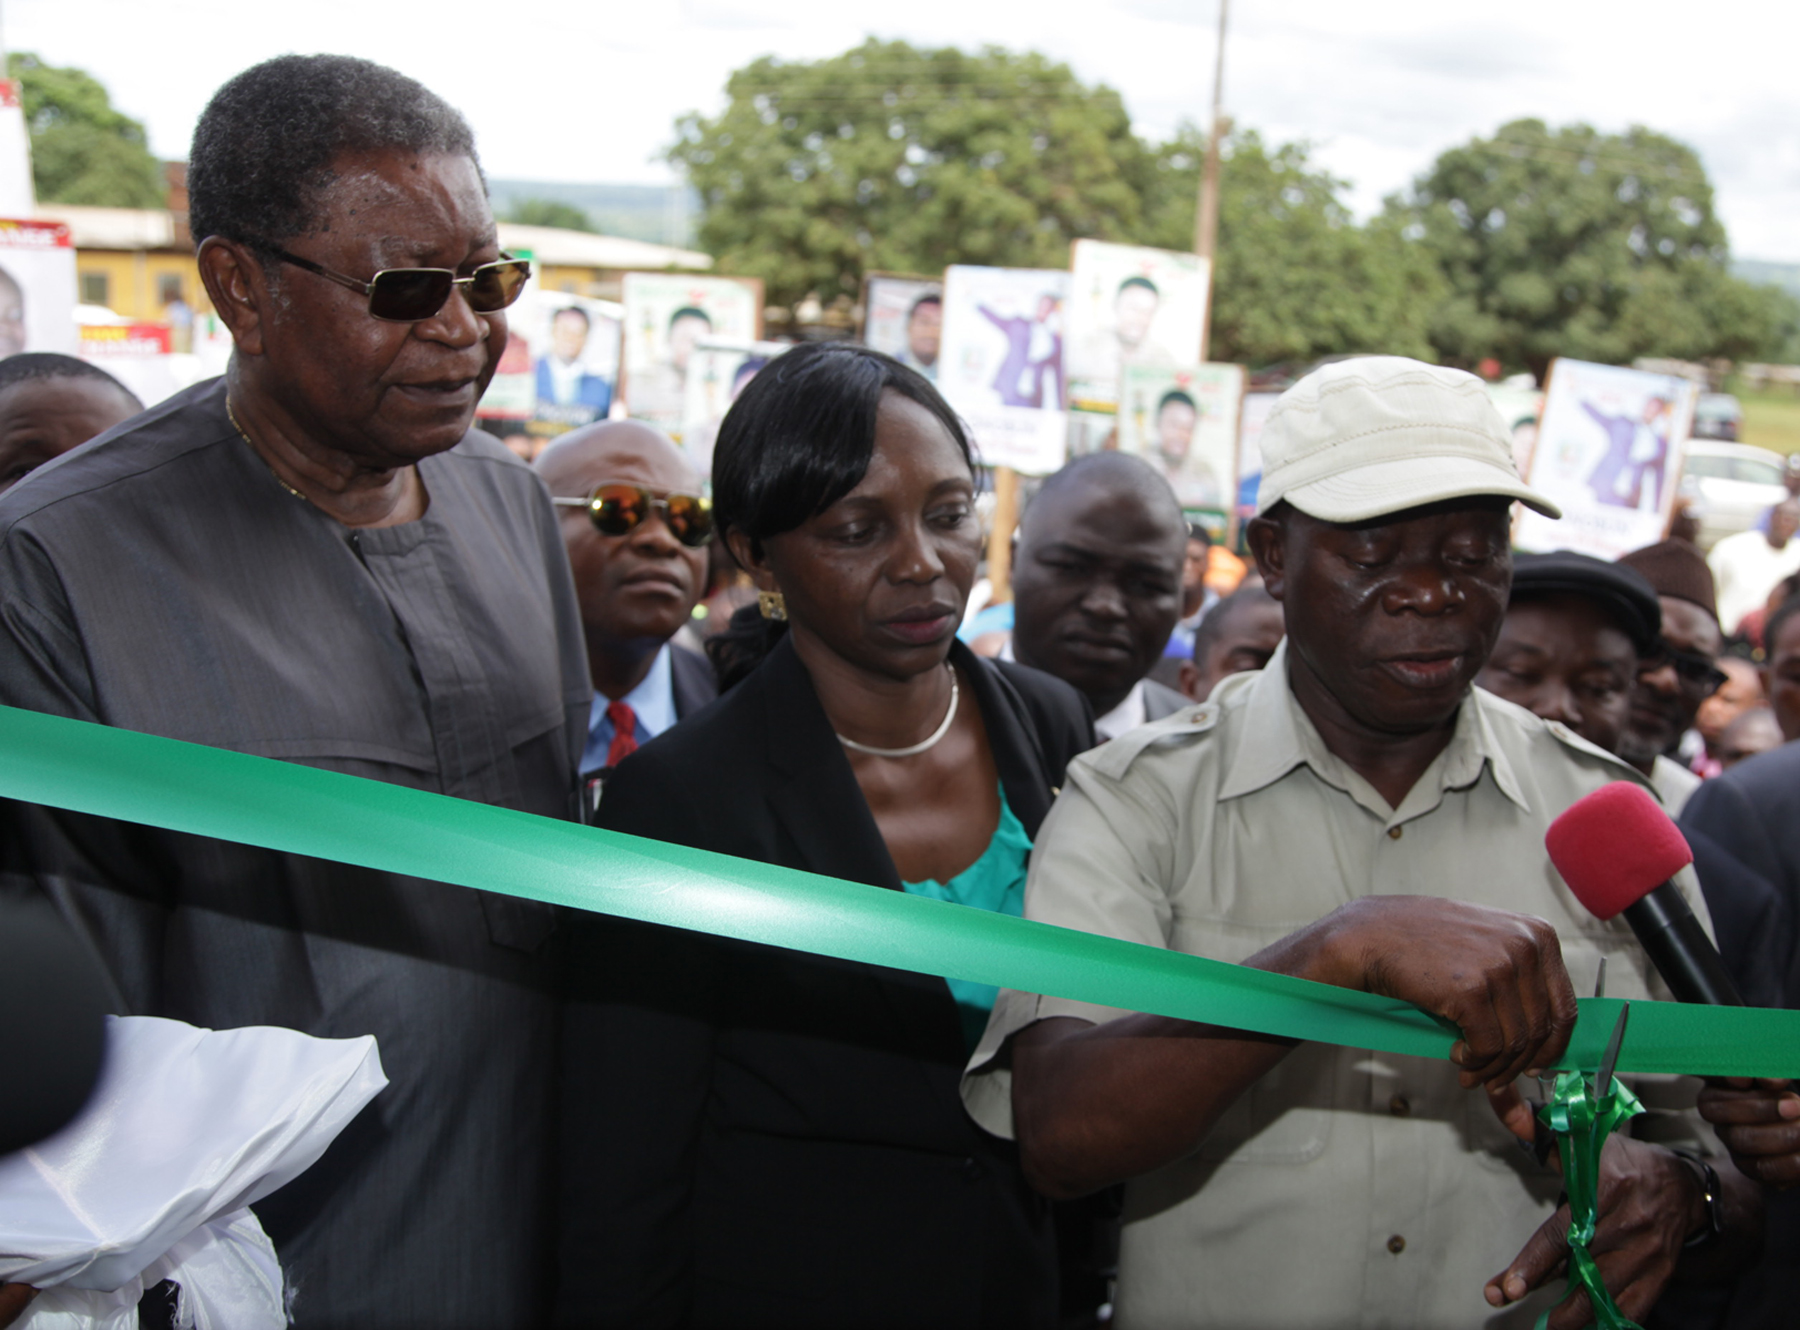 From left: Prof Thomas Audu, member of the Board of Ambrose Alli University, representing the Chairman of the Board; Prof. Cordelia Agbebaku, Vice Chancellor, Ambrose Alli University and Governor Adams Oshiomhole at the commissioning of two 500-capacity lecture theatres and office complex for lecturers at the Ambrose Alli University, Ekpoma on Tuesday.